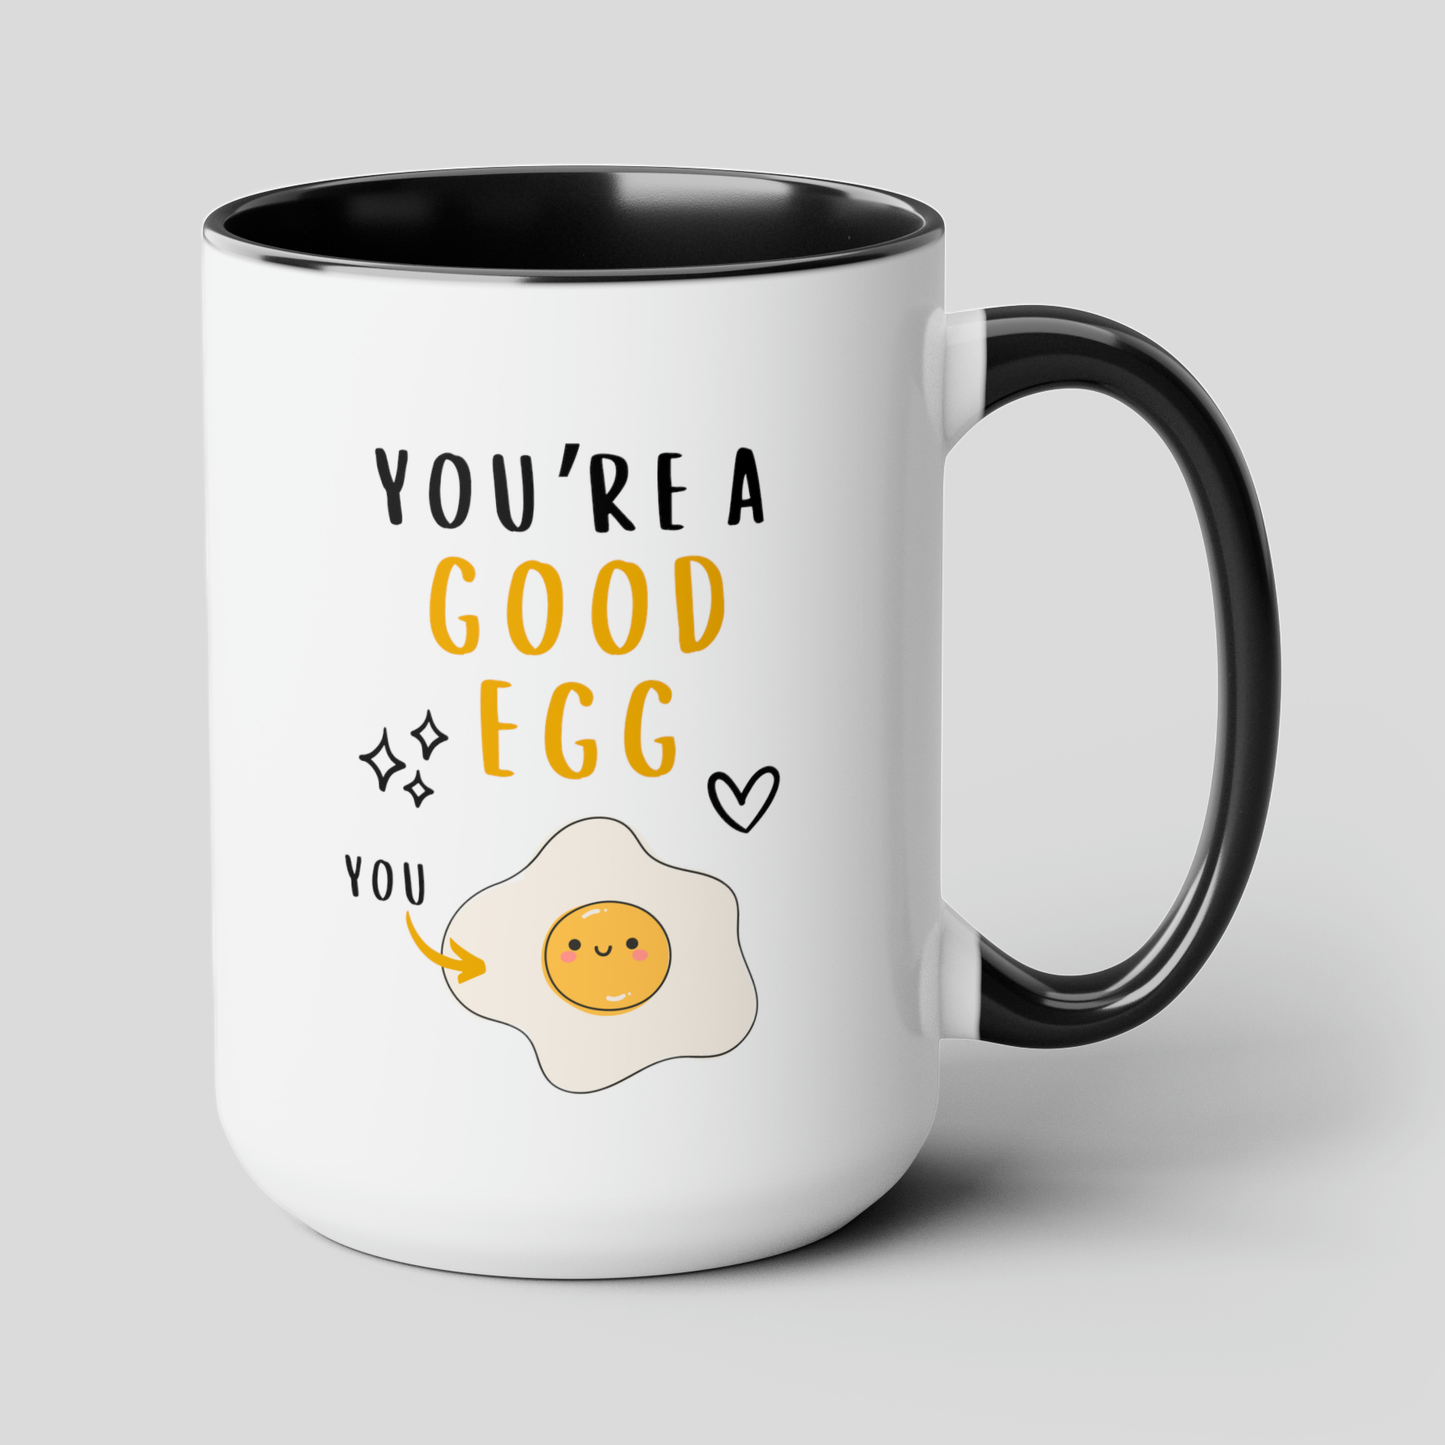 Youre a good egg 15oz white with with black accent large big funny coffee mug tea cup gift for bff friend mothers day gift waveywares wavey wares wavywares wavy wares